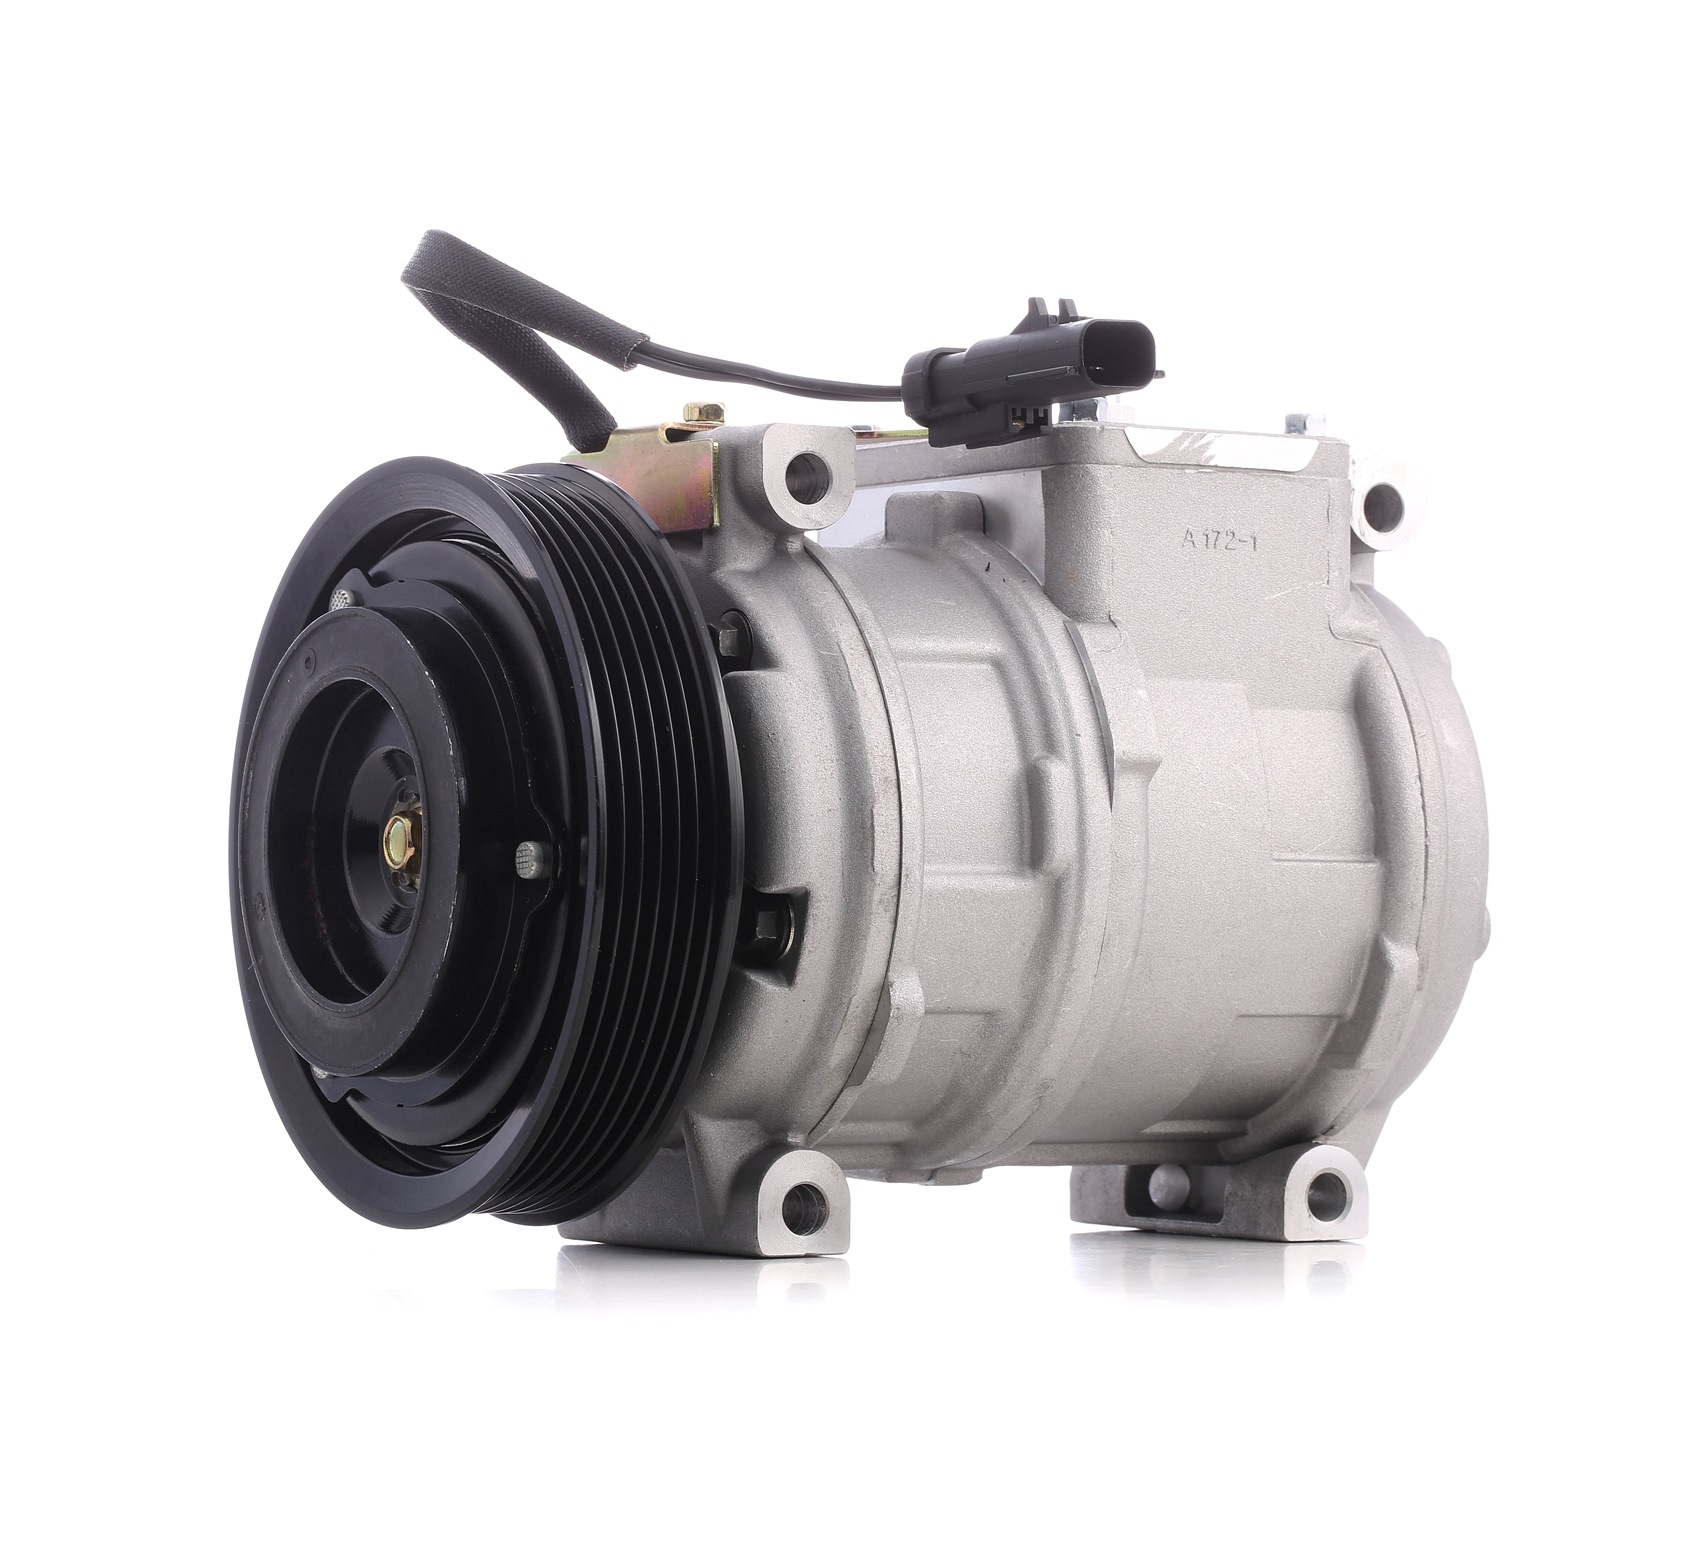 STARK SKKM-0340378 Air conditioning compressor 10PA17C, PAG 46, R 134a